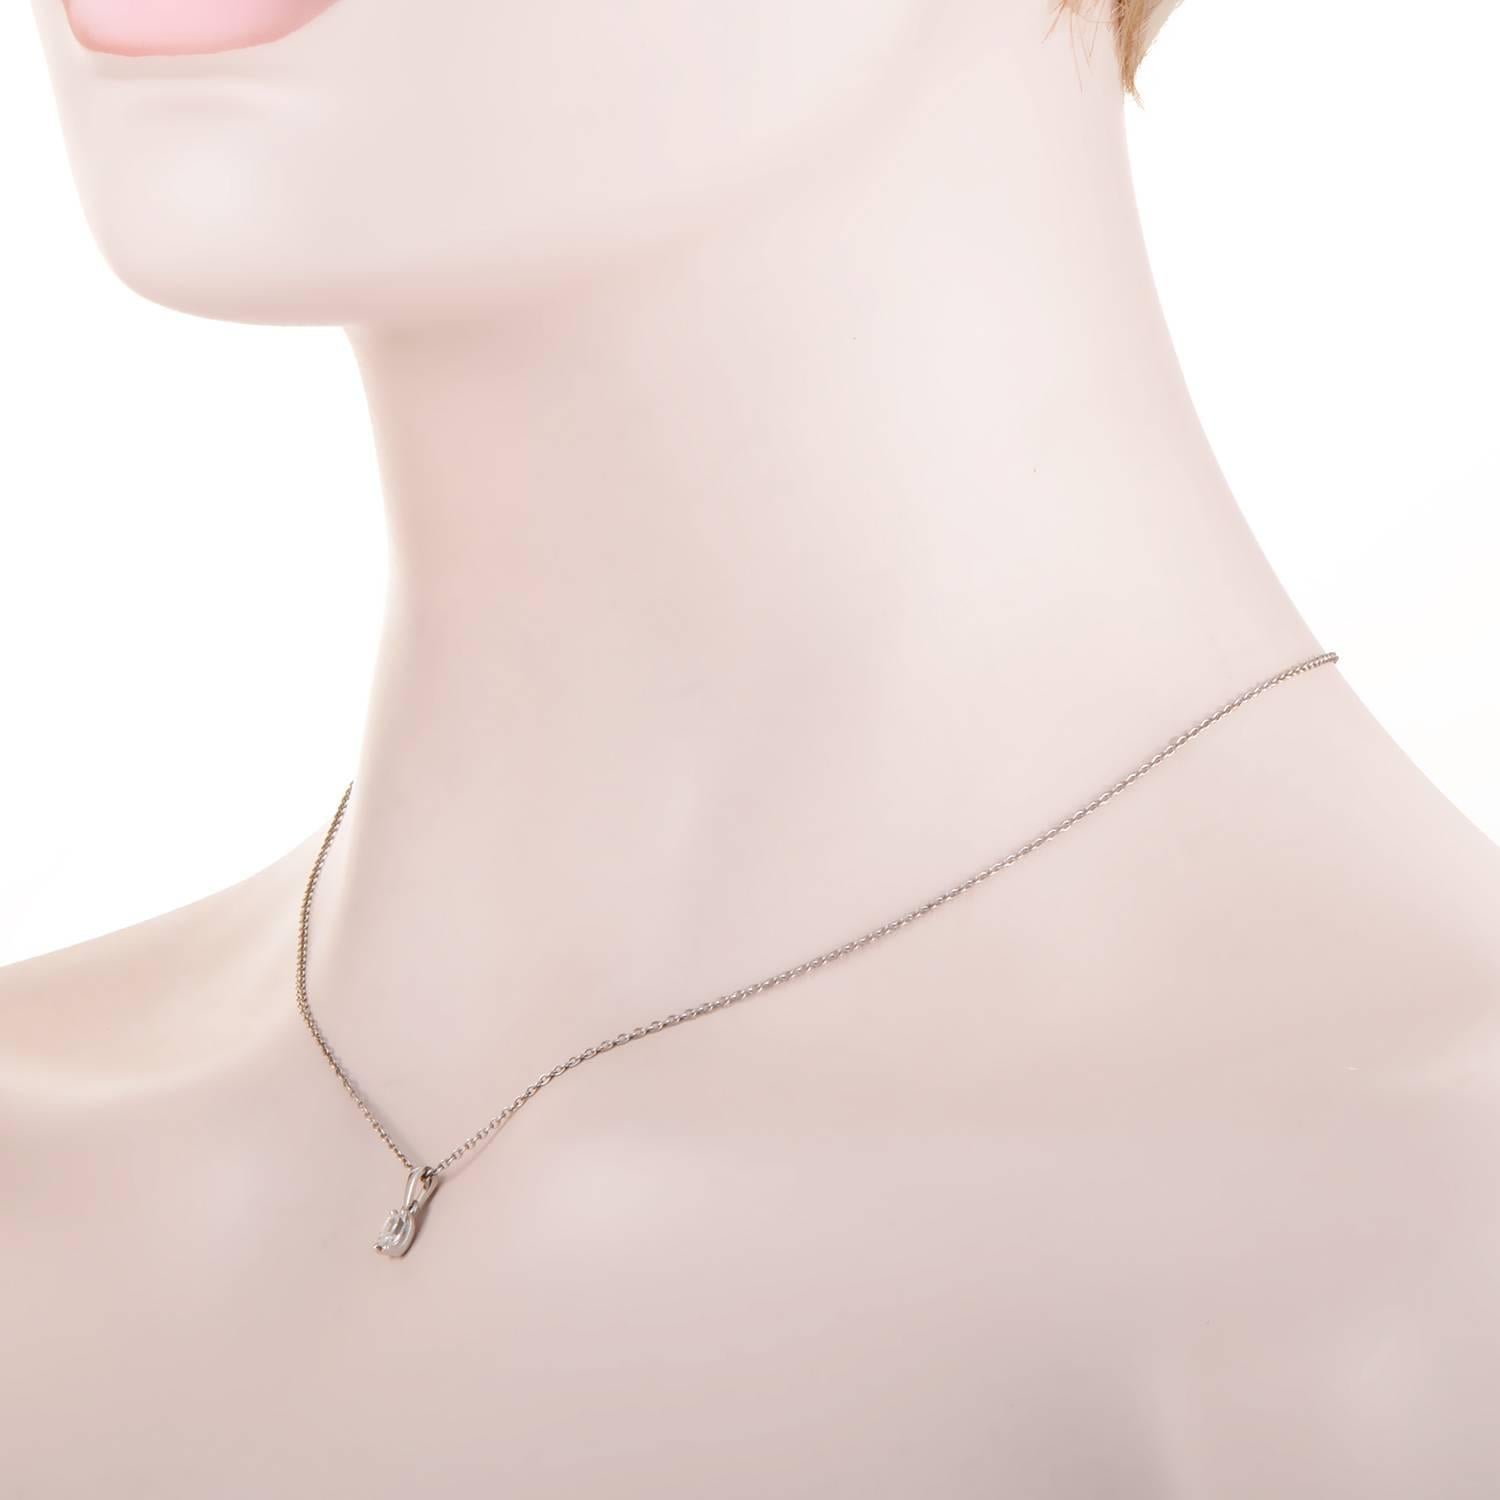 Frank Muller create iconic watches, and have refined examples of beauty in their jewelry line. This delicately sophisticated necklace is no exception. The chain and pendant setting are made of crisp 18K white gold that elegantly presents an oval cut